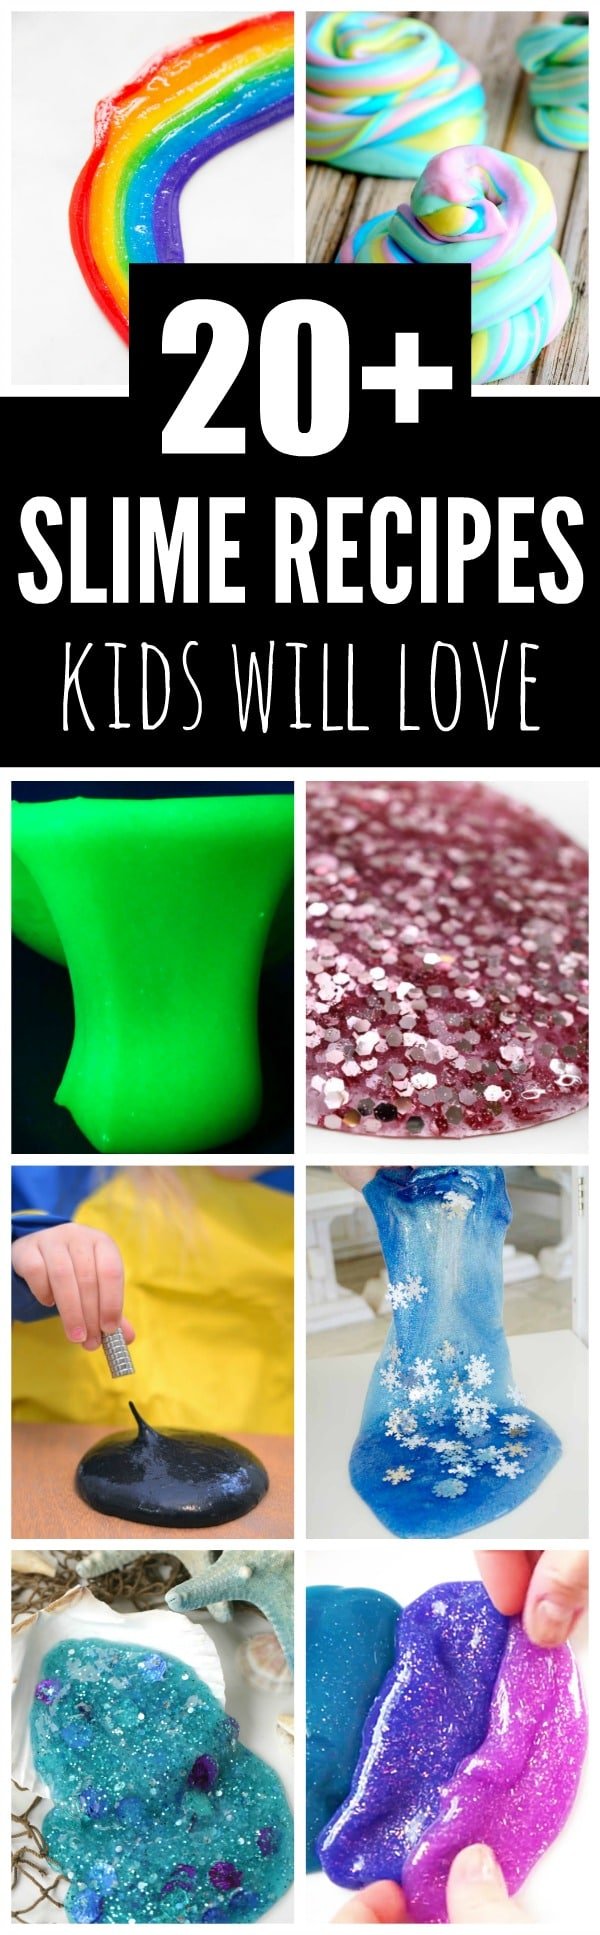 Homemade Slime Recipes Kids Will Love - Pretty My Party